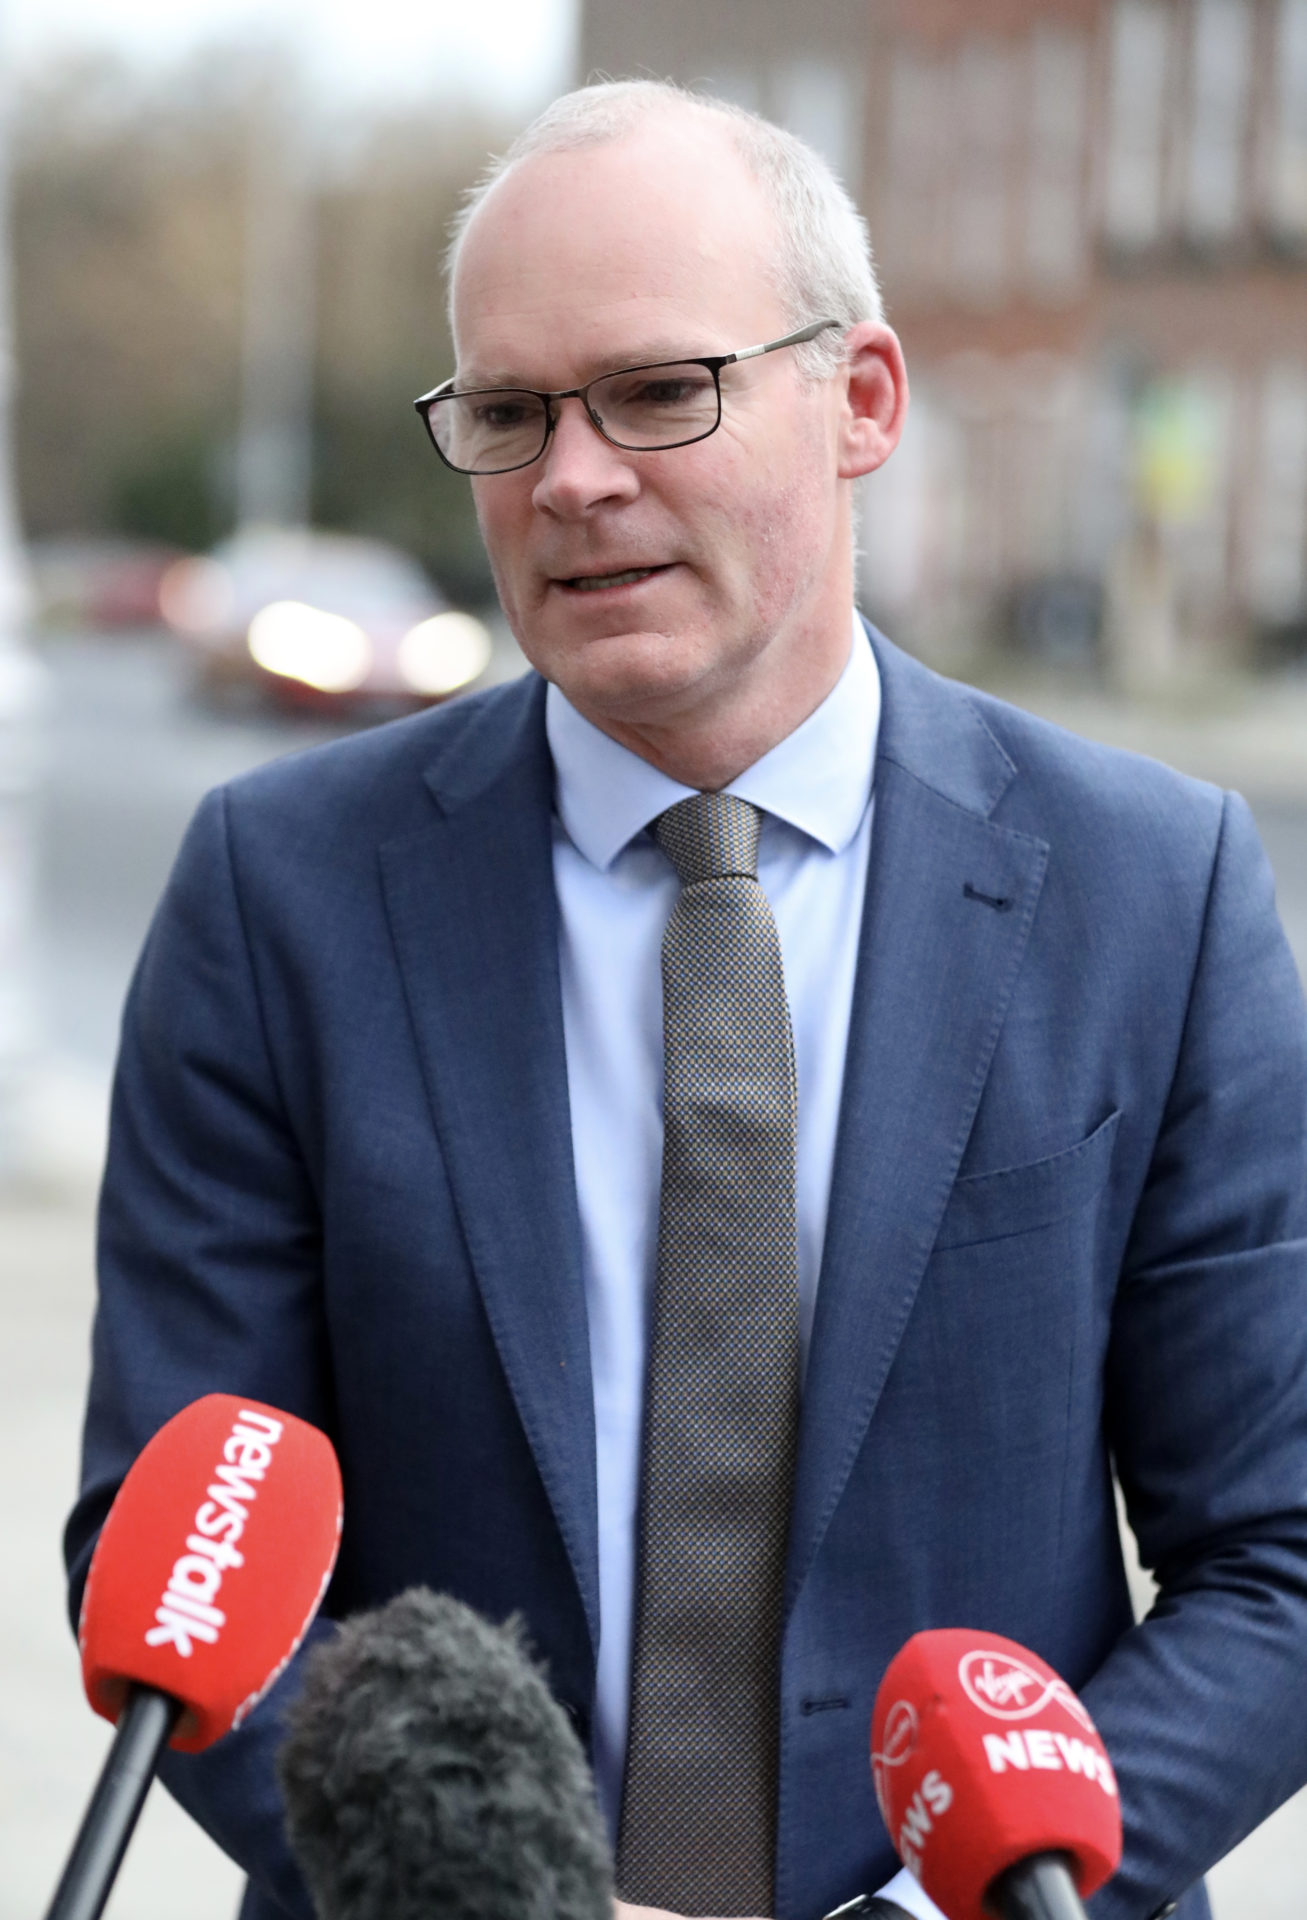 Enterprise Minister Simon Coveney on his way into Government Buildings for a Cabinet meeting